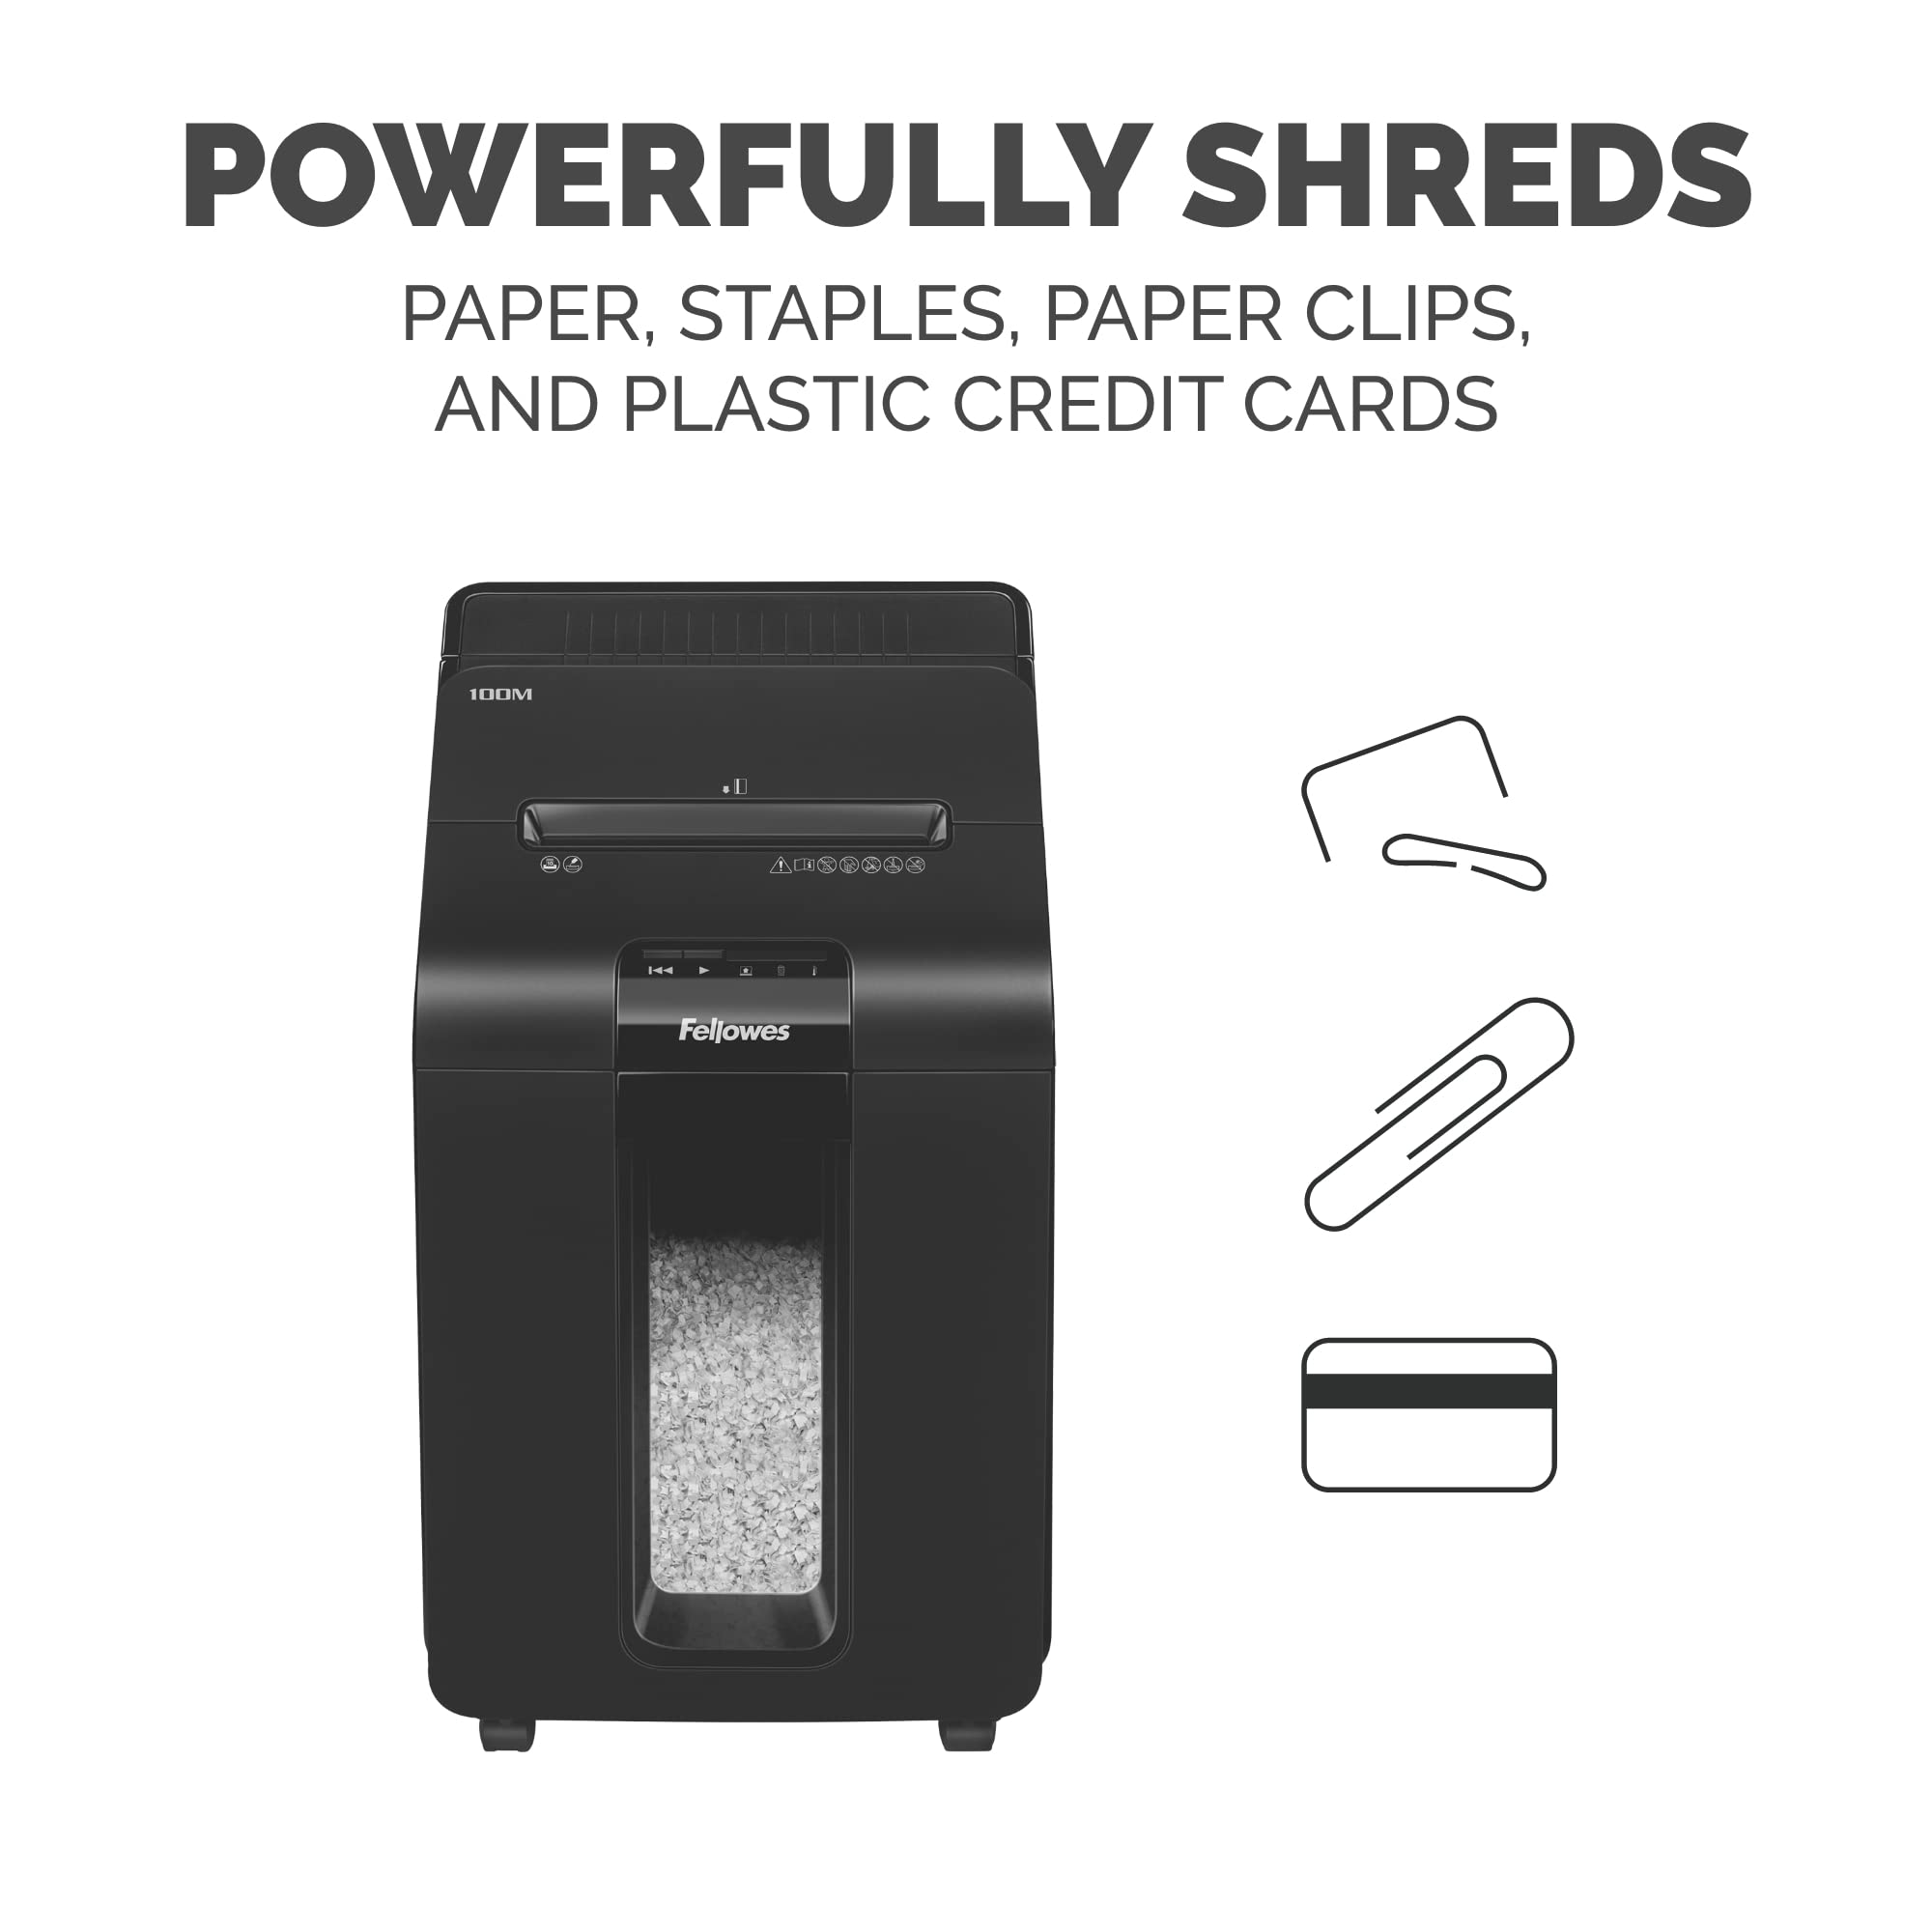 Fellowes AutoMax Micro-Cut 100M Commercial Office Auto Feed 2-in-Paper Shredder with 100-Sheet Capacity